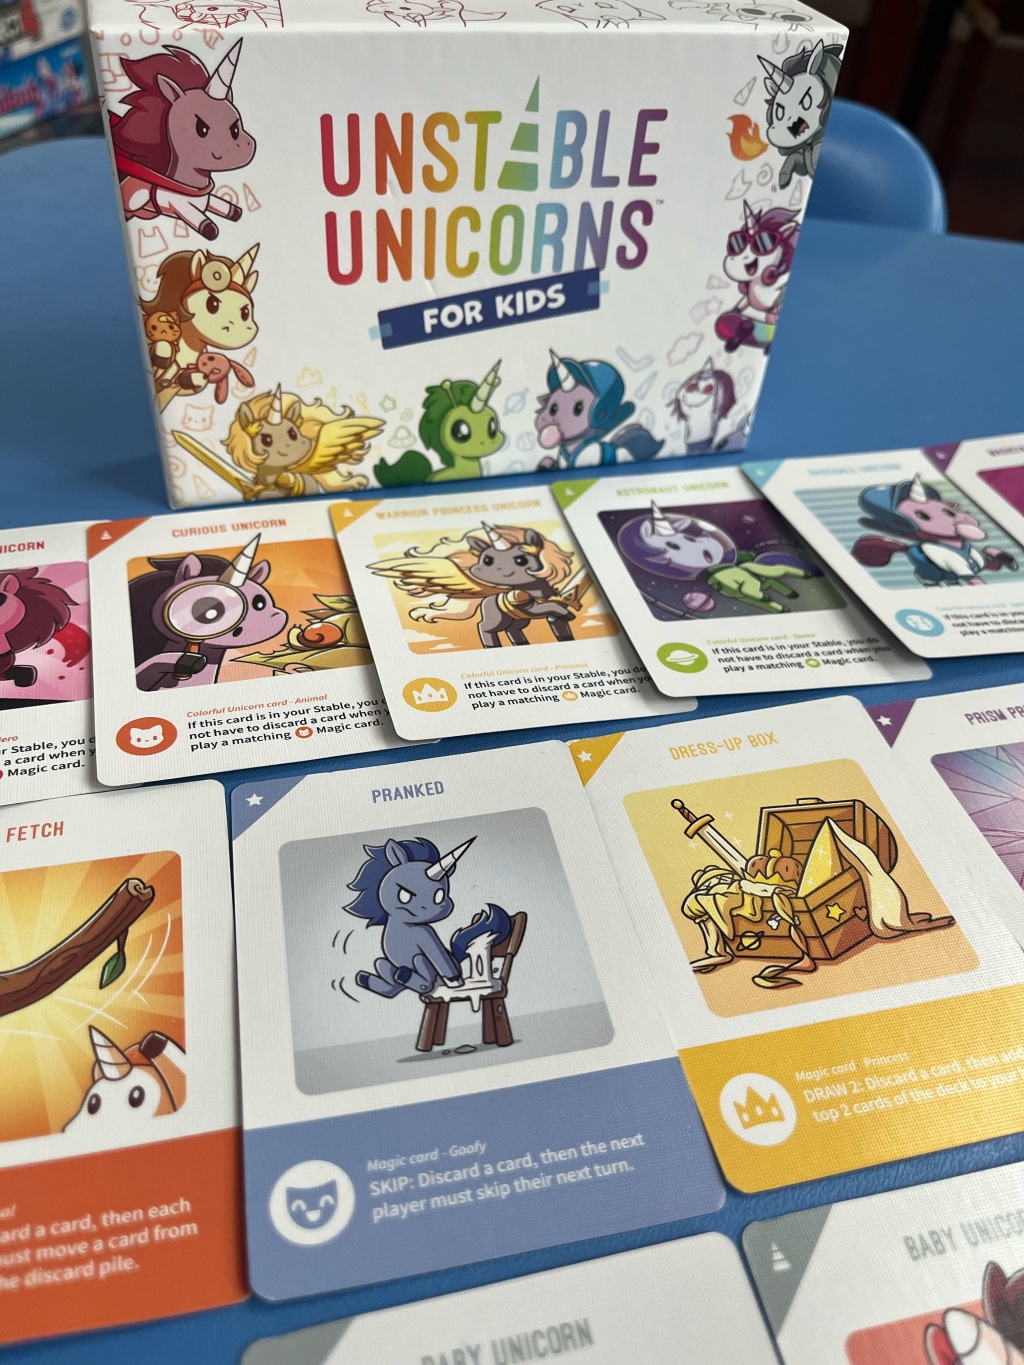 Unstable Unicorns For Kids edition cards laid out on table